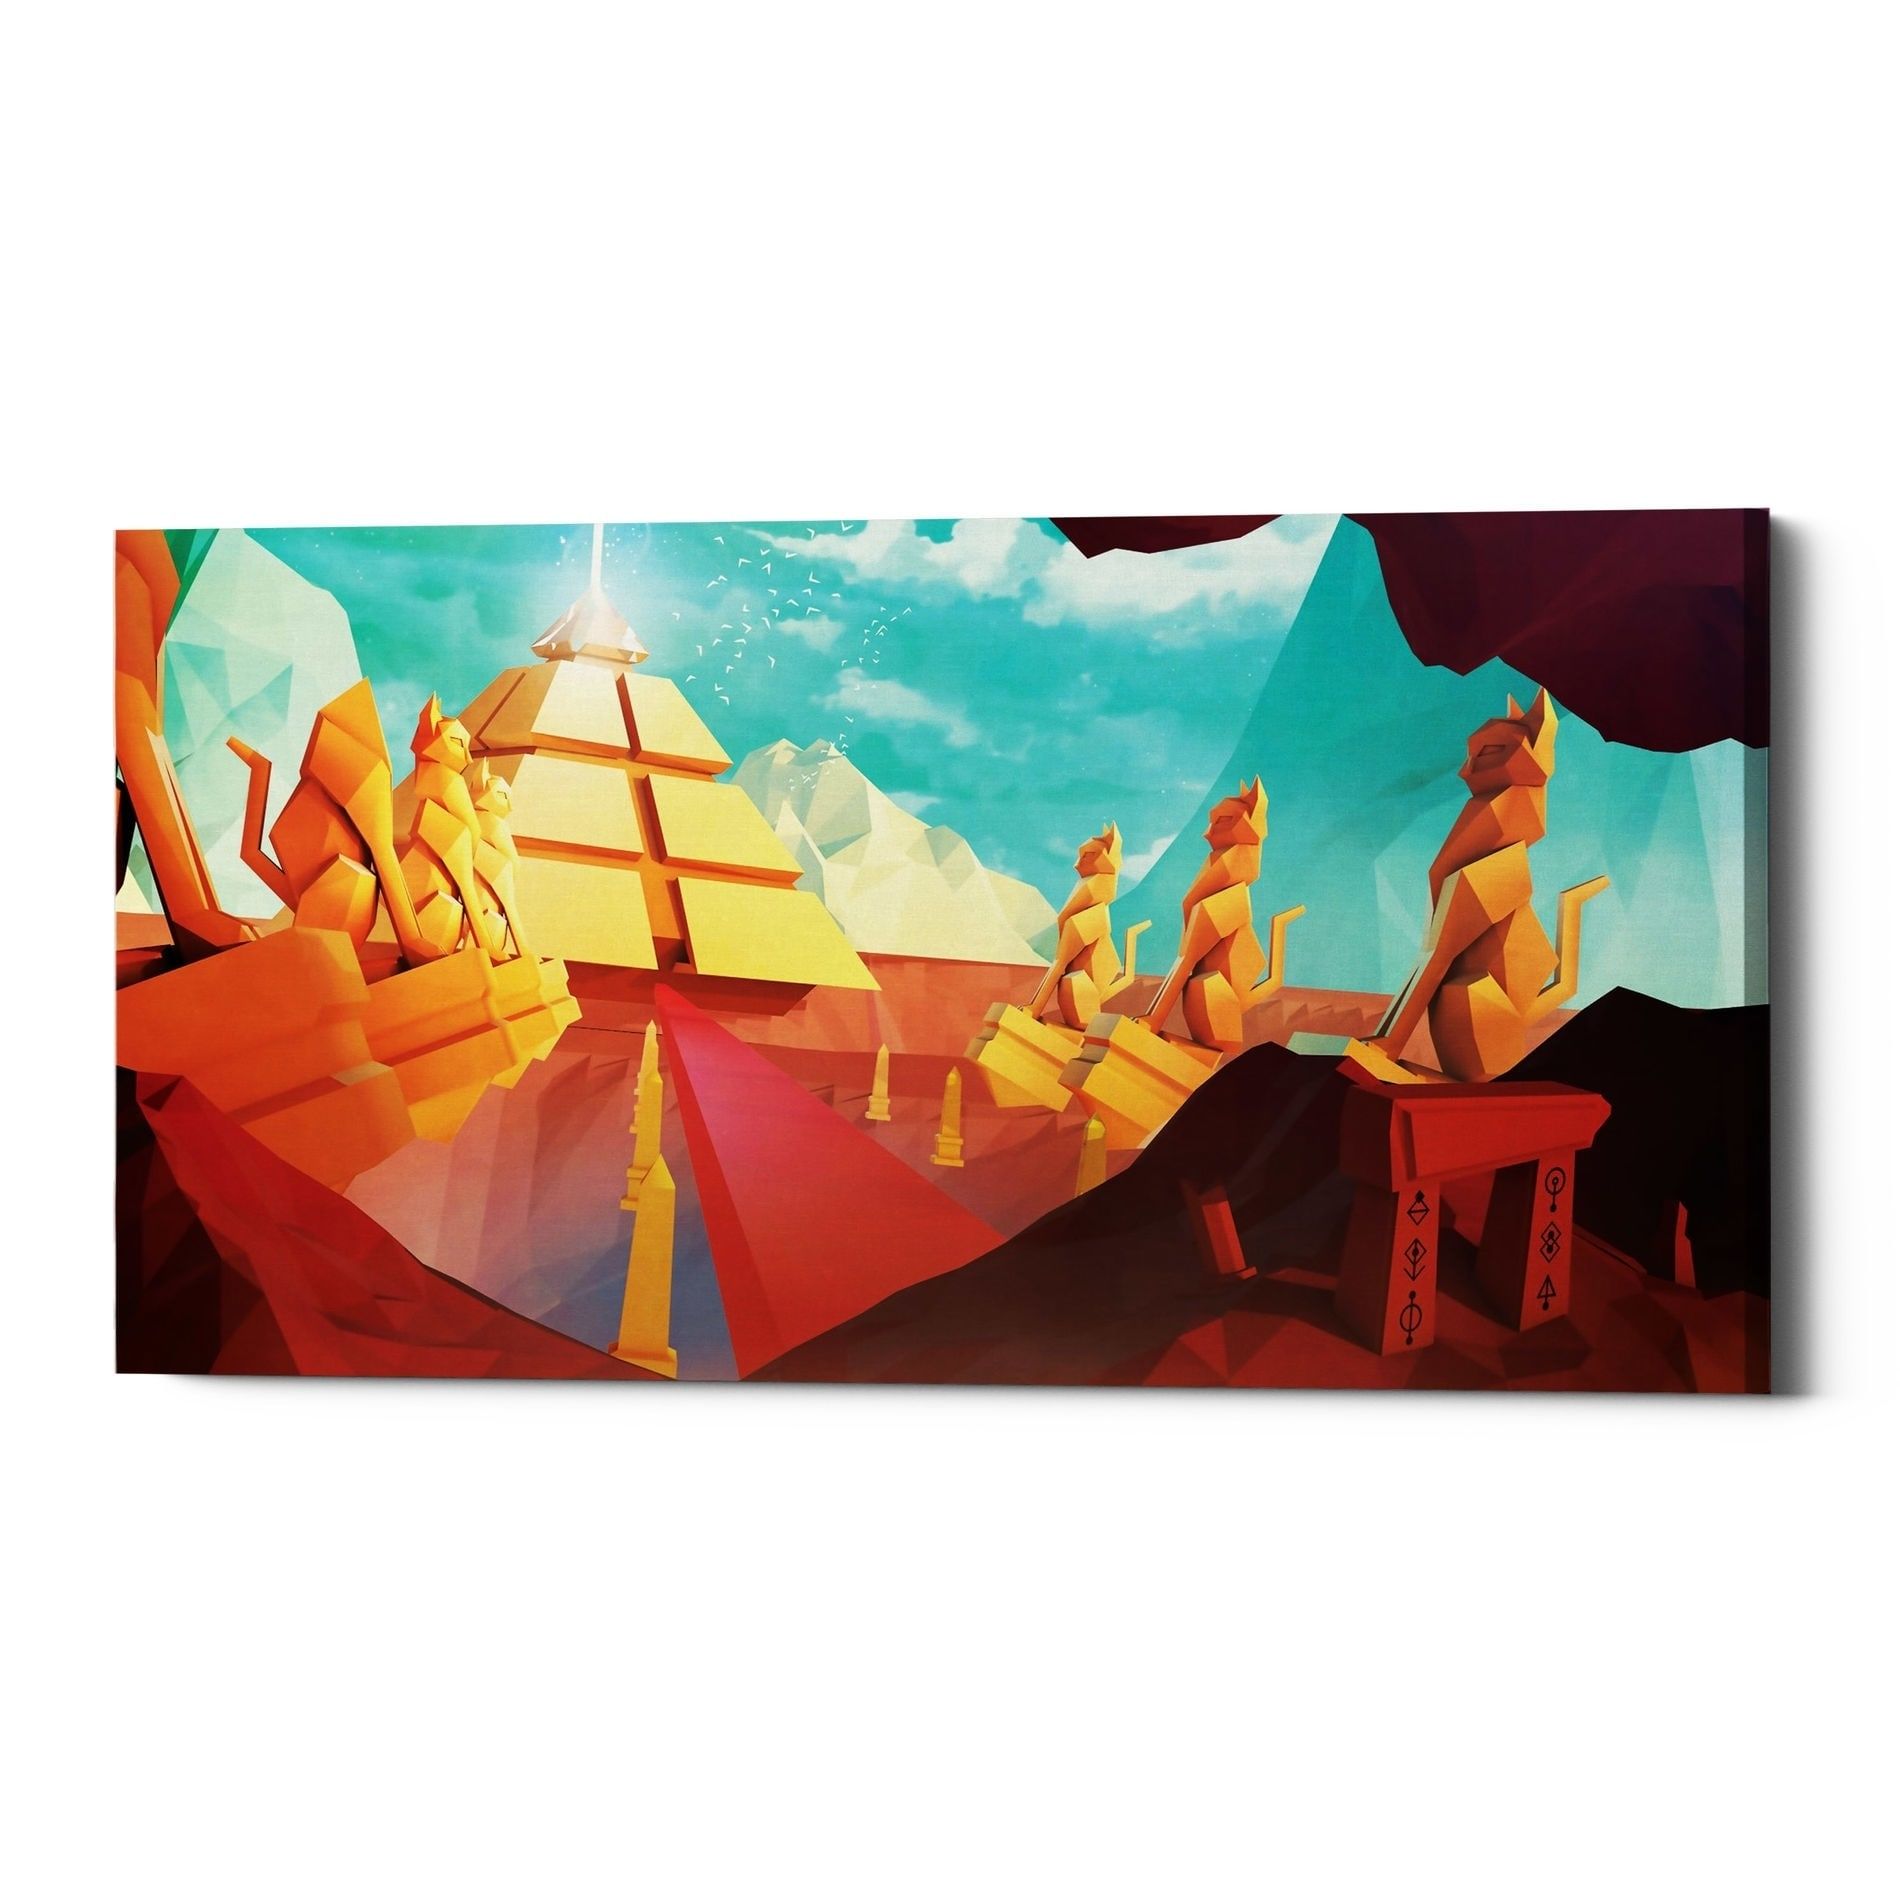 Epic Graffiti "low Poly Pyramid"jonathan Lam, Giclee Within Pyrimids Wall Art (View 7 of 15)